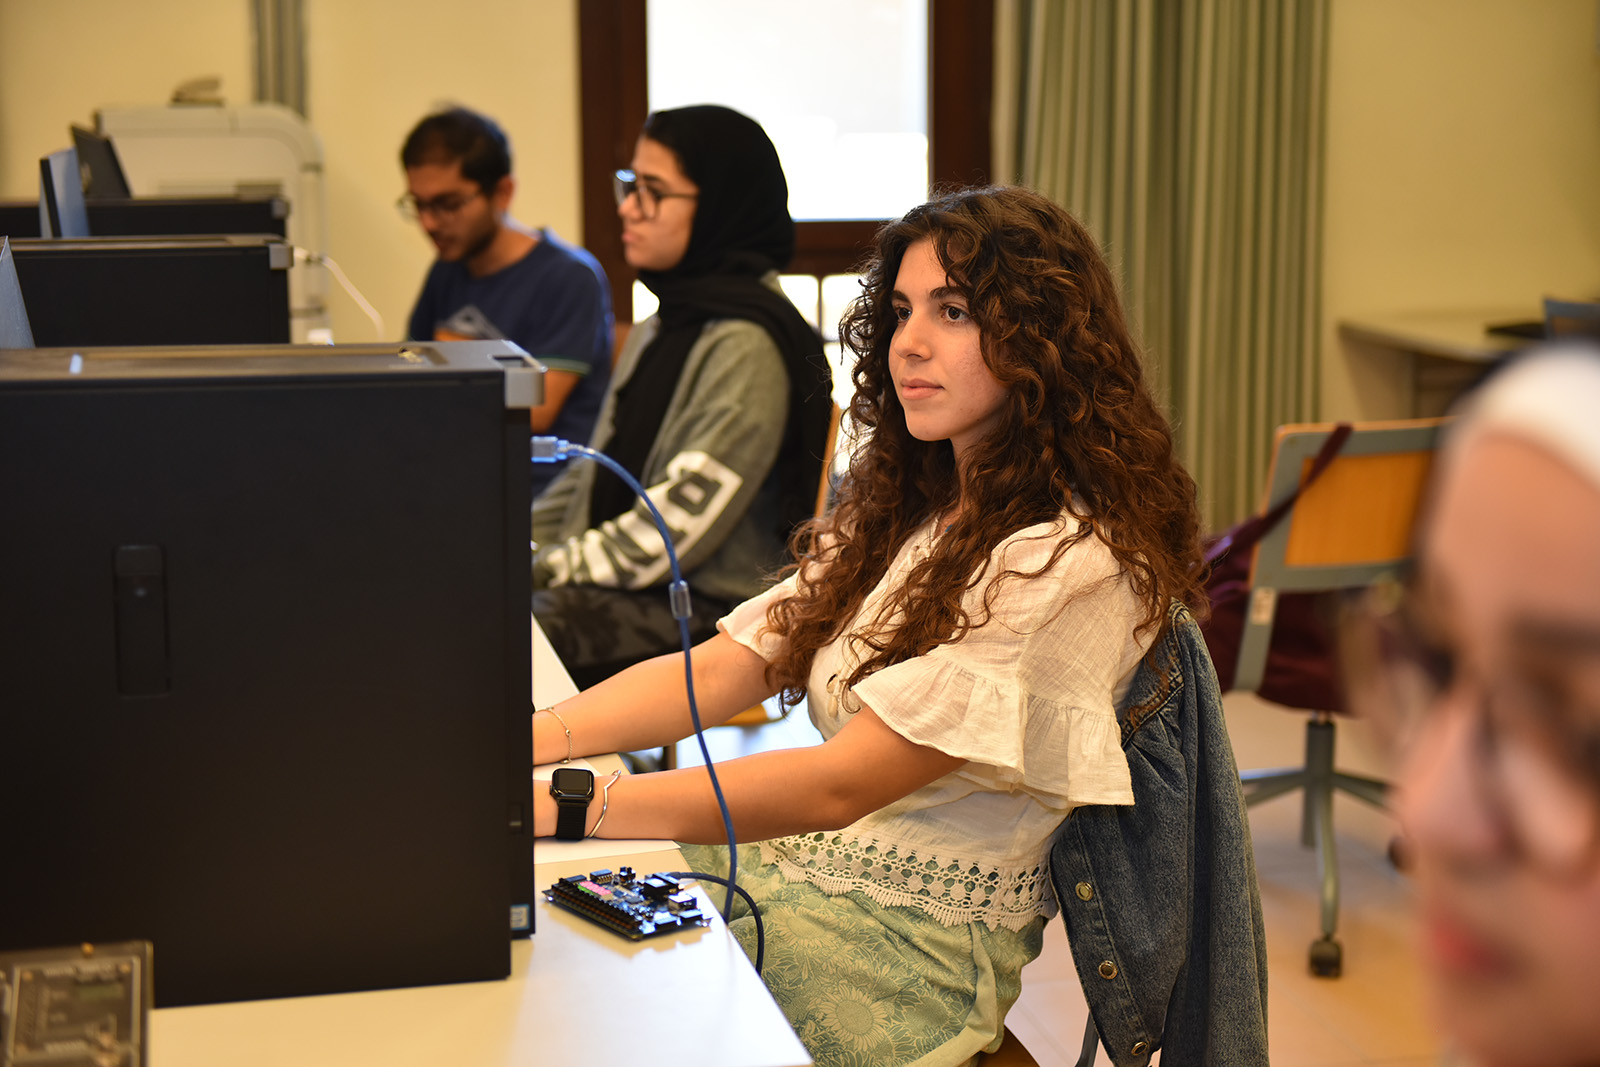 Students siting in a computer lab